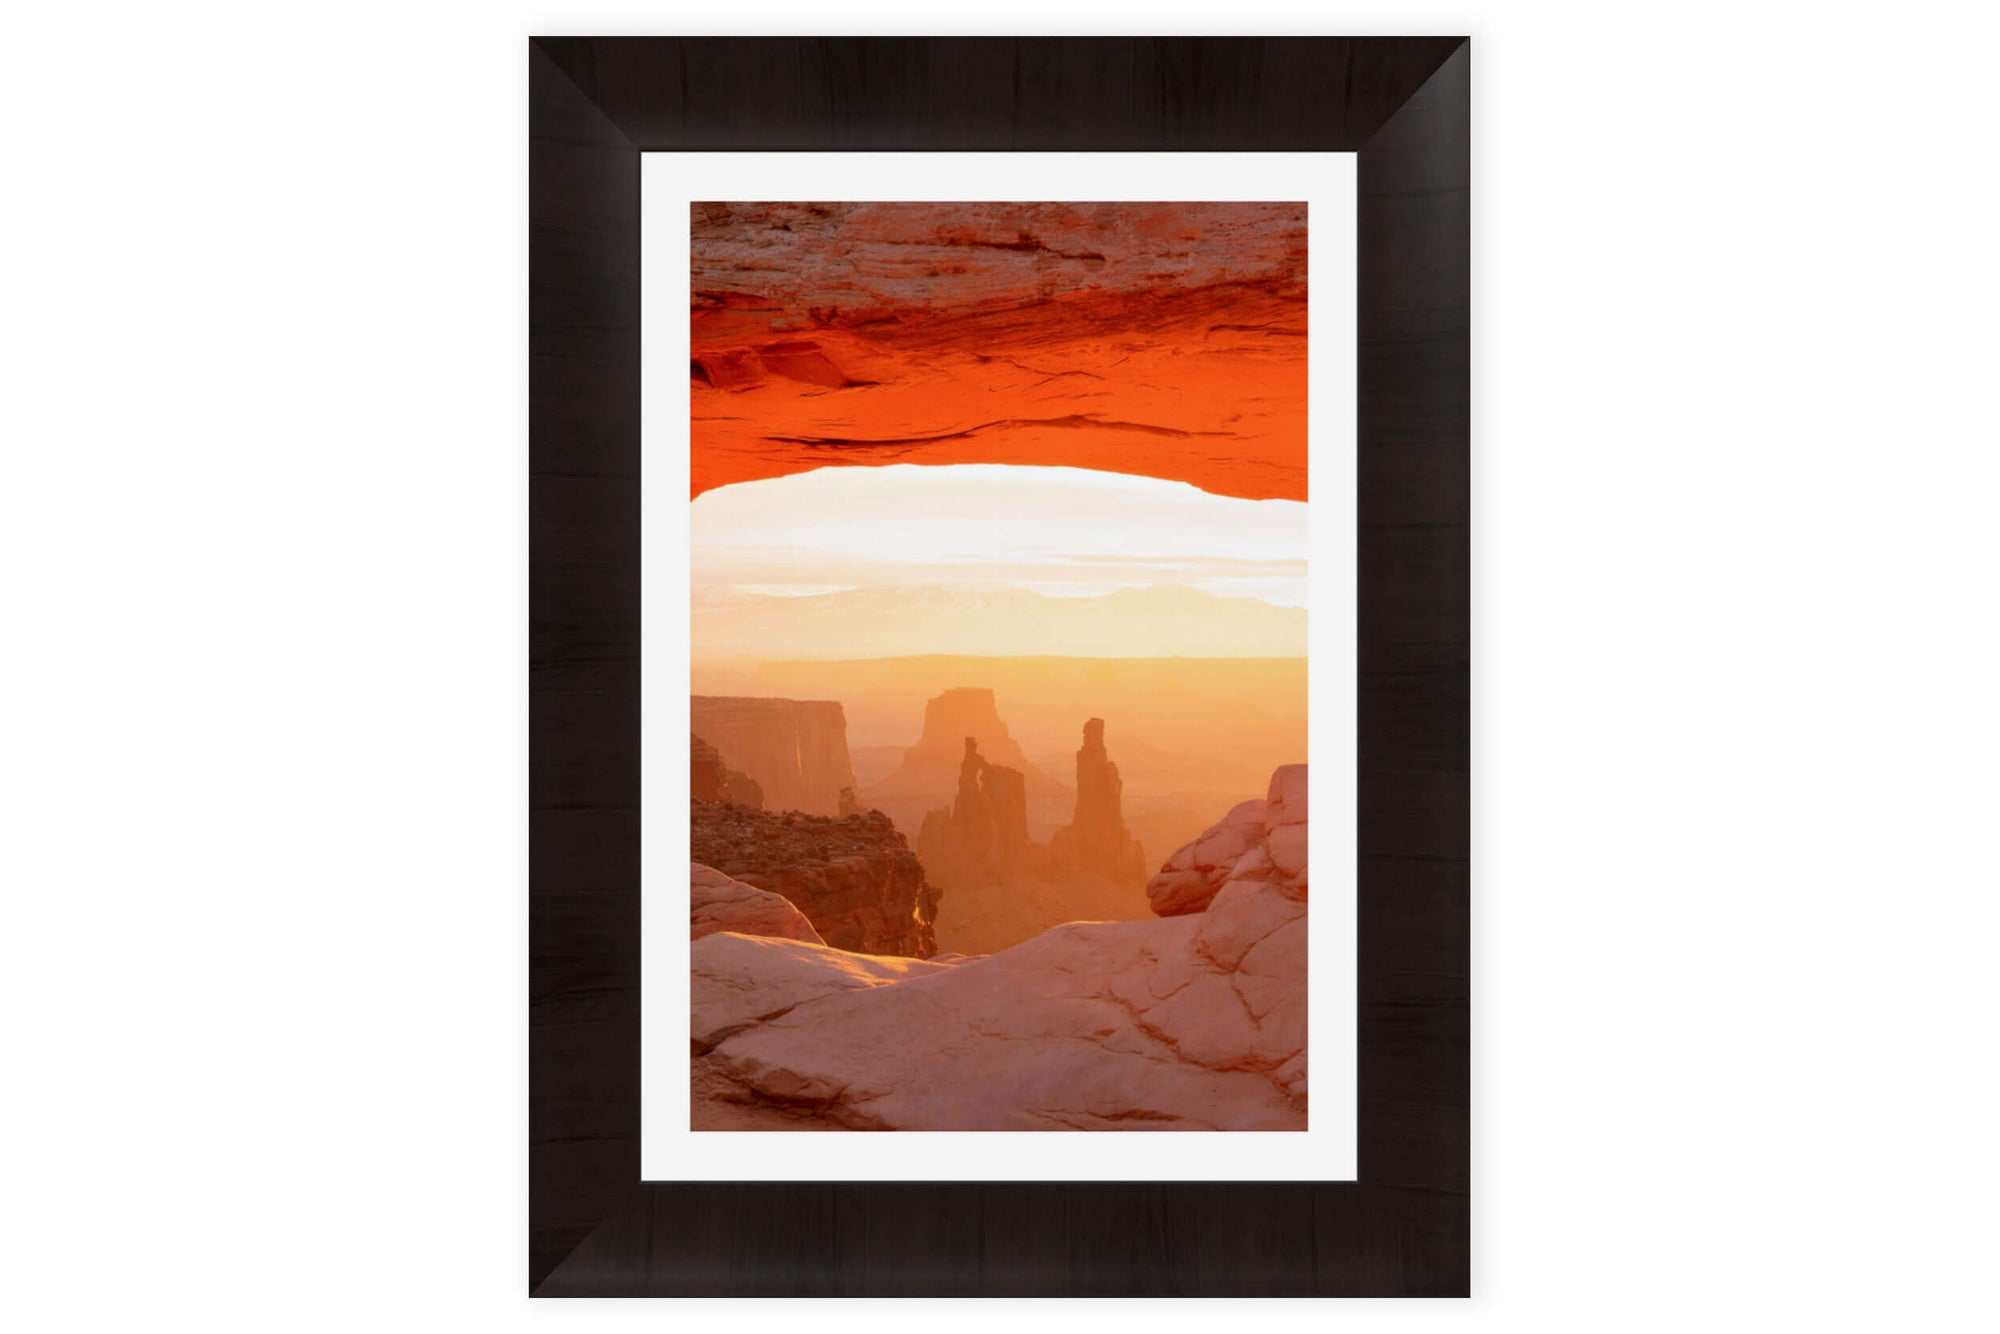 A framed Mesa Arch picture at sunrise from this hike in Canyonlands National Park in Utah.